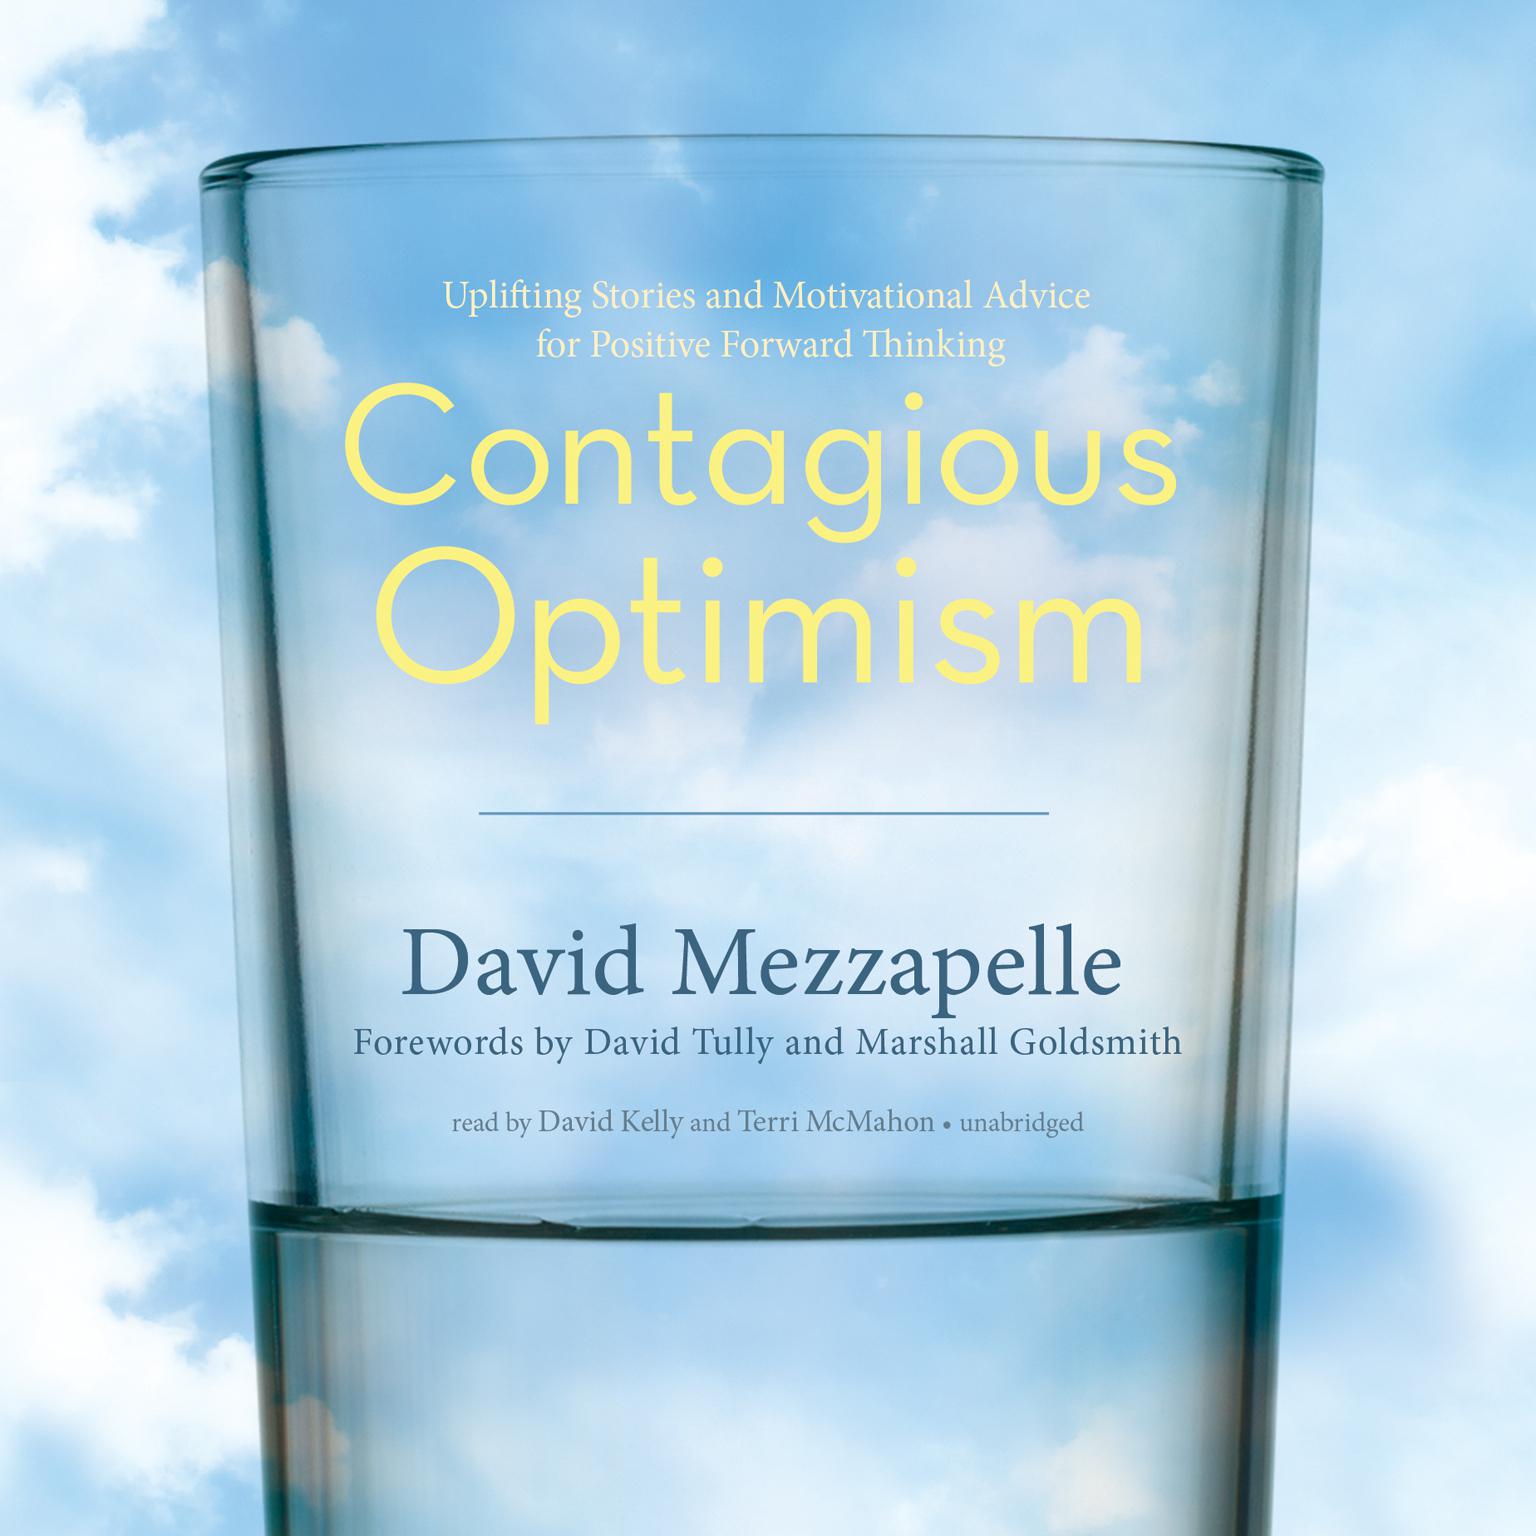 Contagious Optimism: Uplifting Stories and Motivational Advice for Positive Forward Thinking Audiobook, by David Mezzapelle